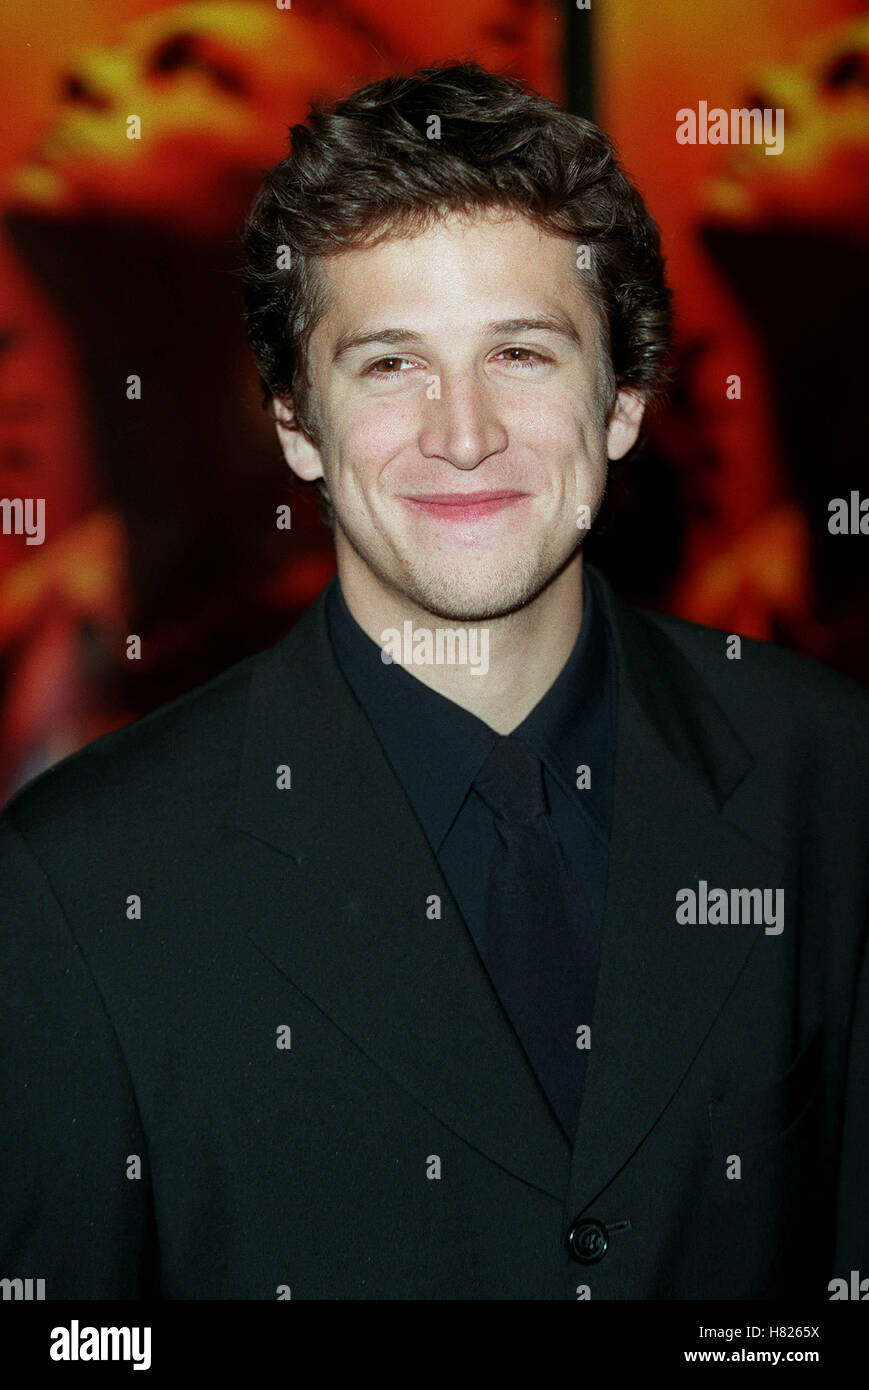 GUILLAUME CANET DIANE KRUGER LOS ANGELES USA 02 February 2000 Stock Photo -  Alamy